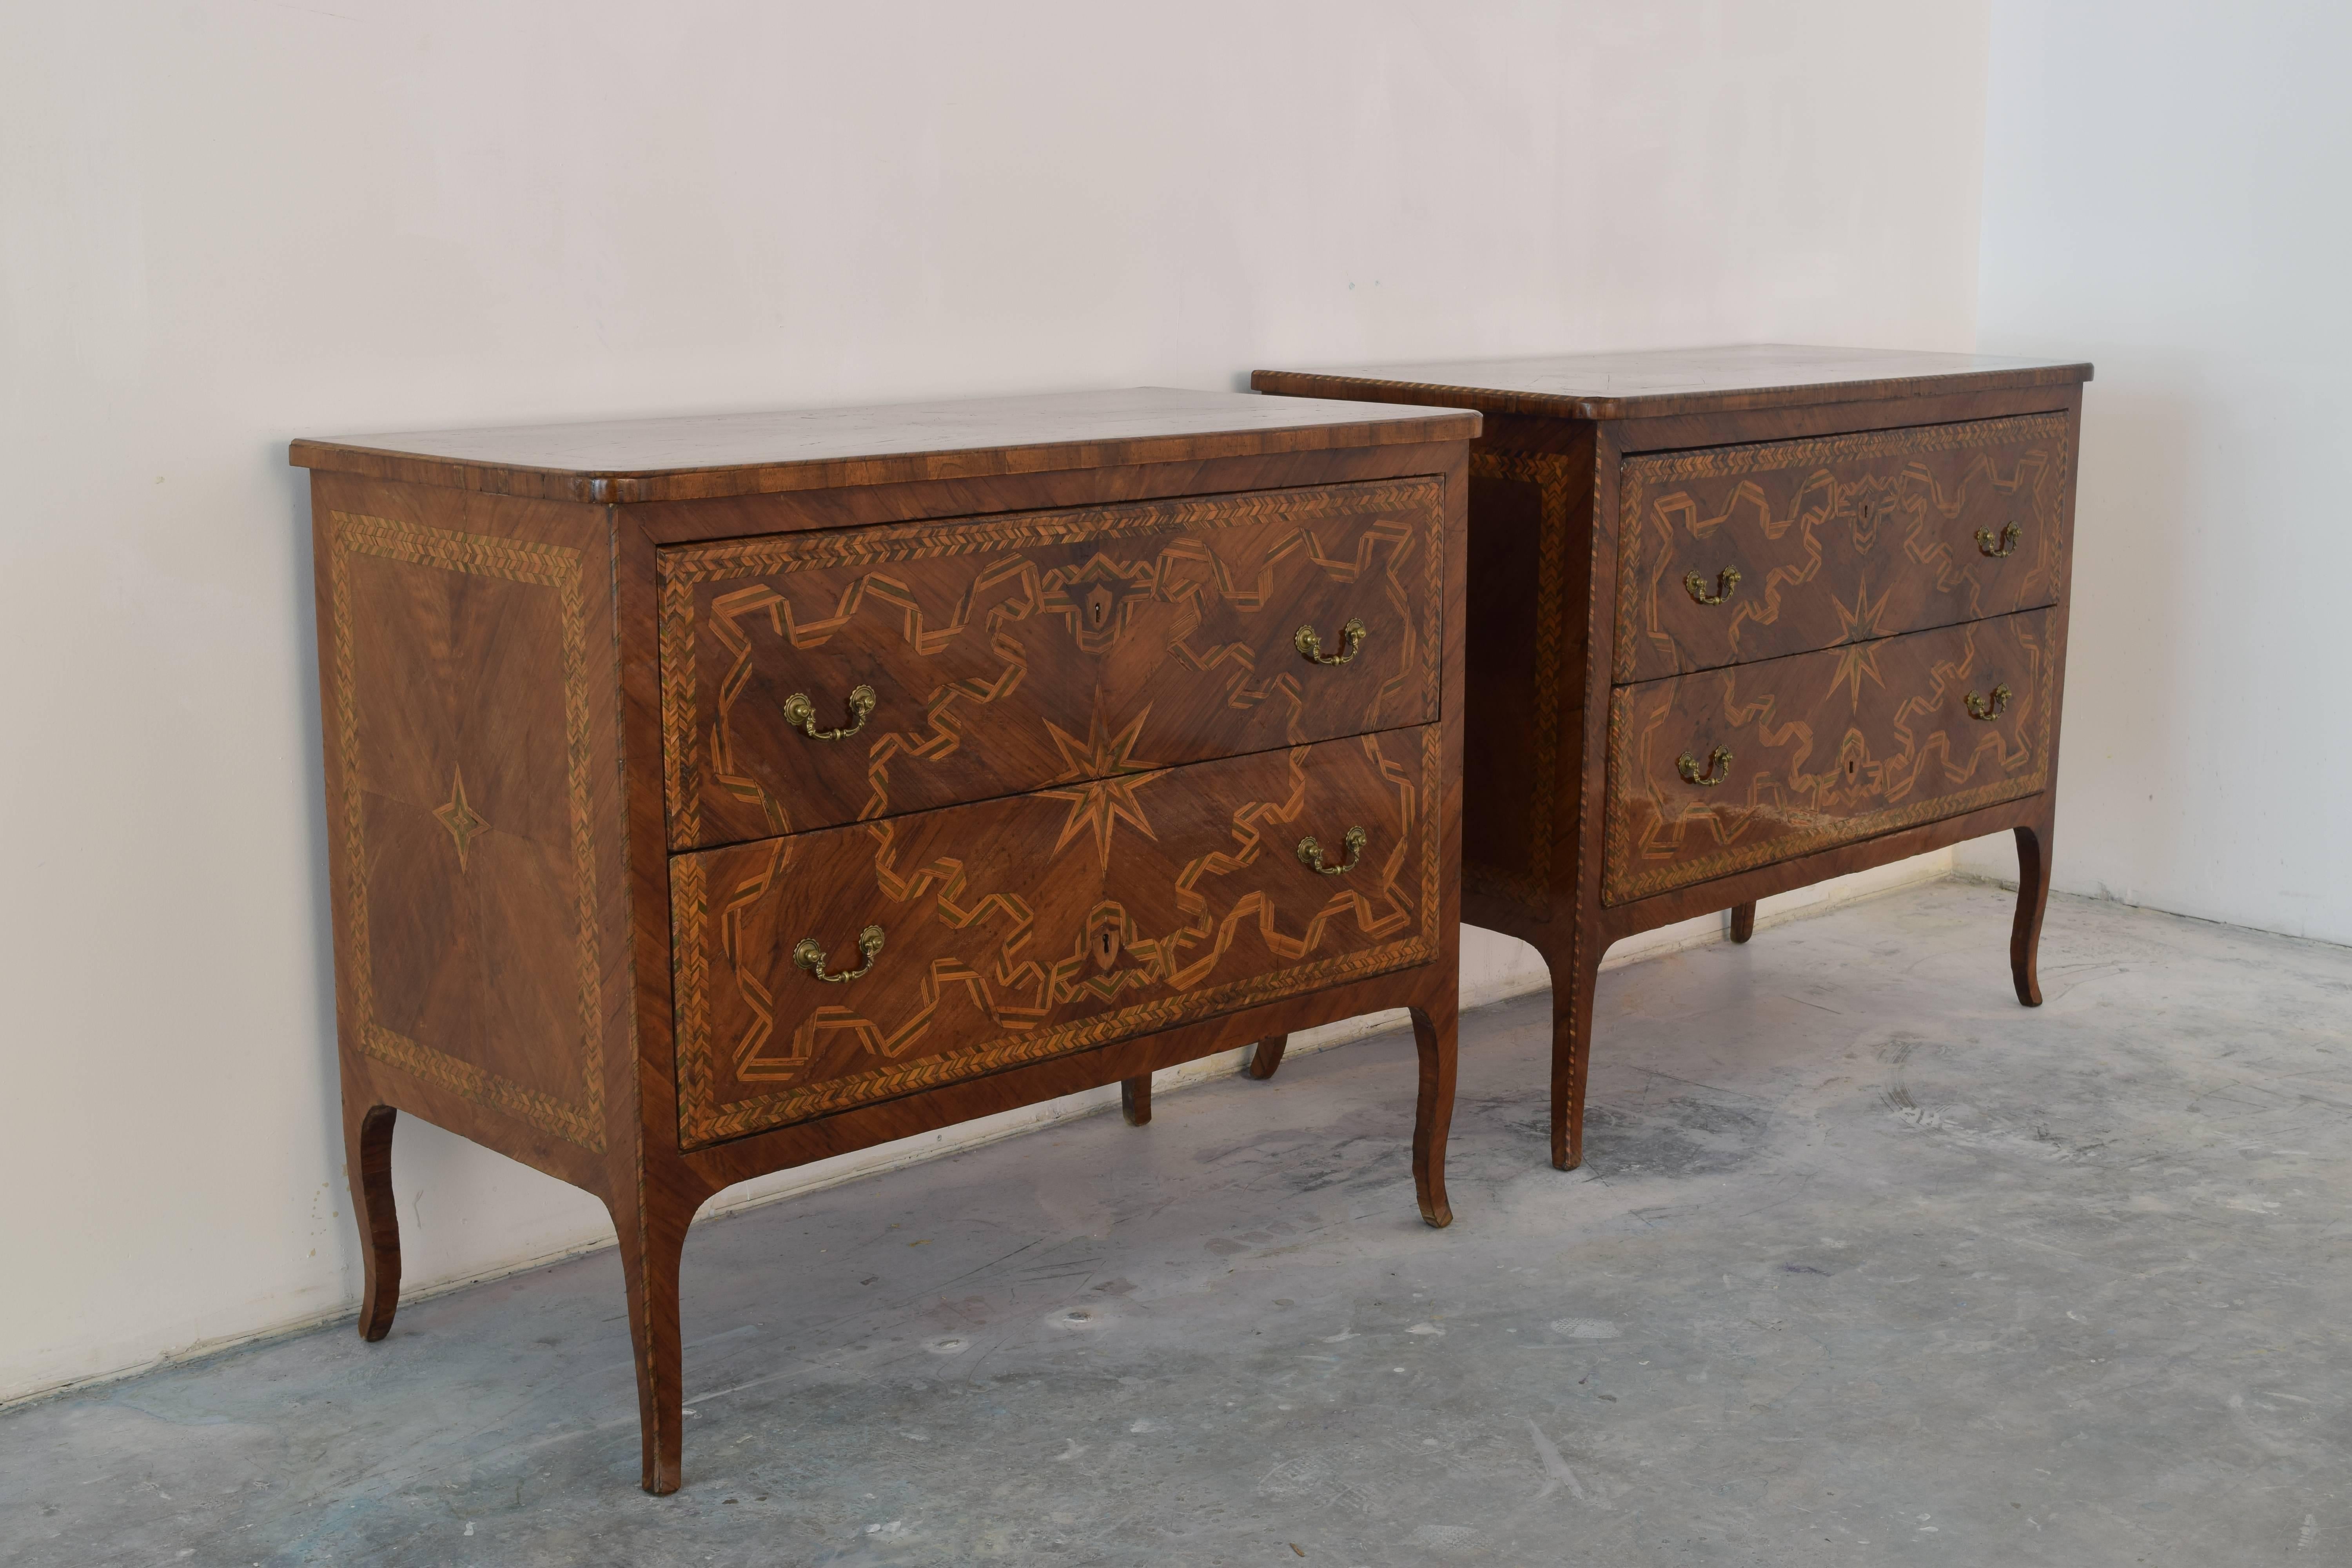 Constructed in the early third quarter of the 18th century in the Emilia Romagna region of Italy, specifically the town of Rolo, this exceptional and rare pair of commodes are completely veneered in walnut, tinted pearwood, and fruitwood veneer, the